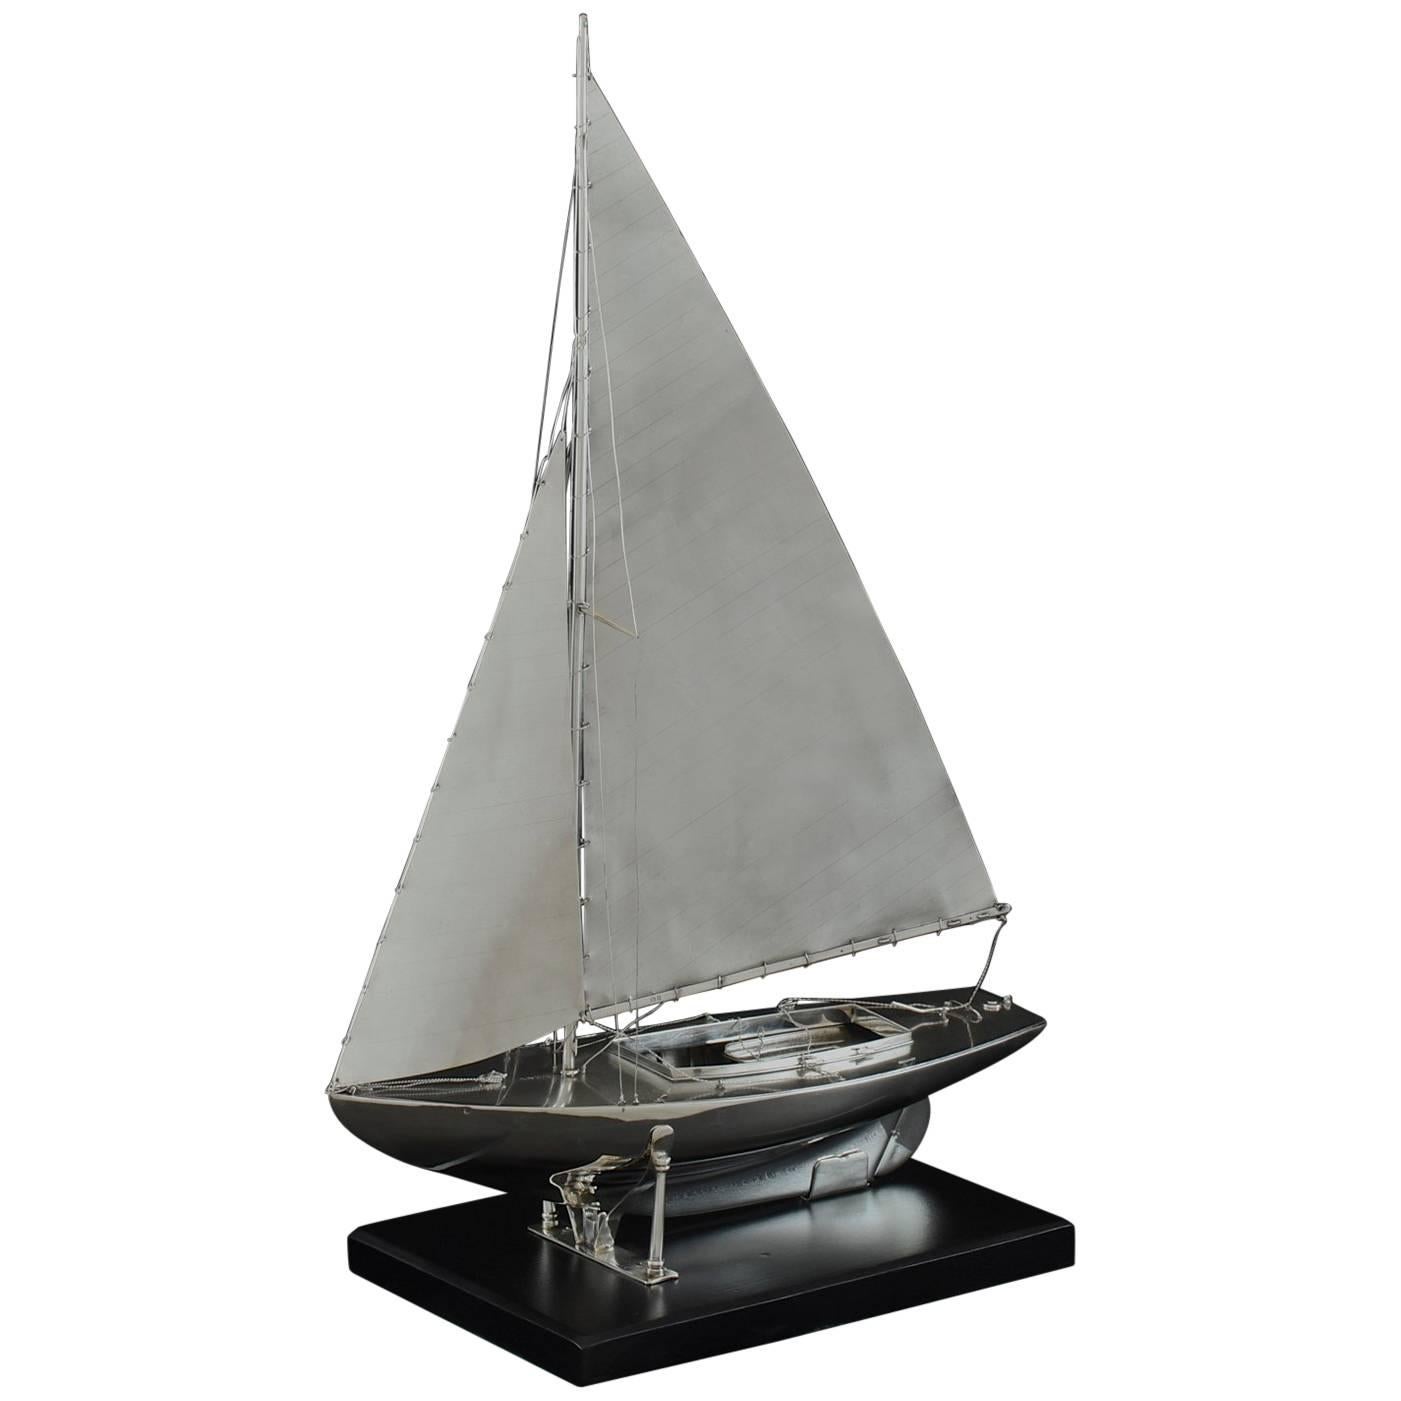 Benzie's Sterling Silver Model Yacht